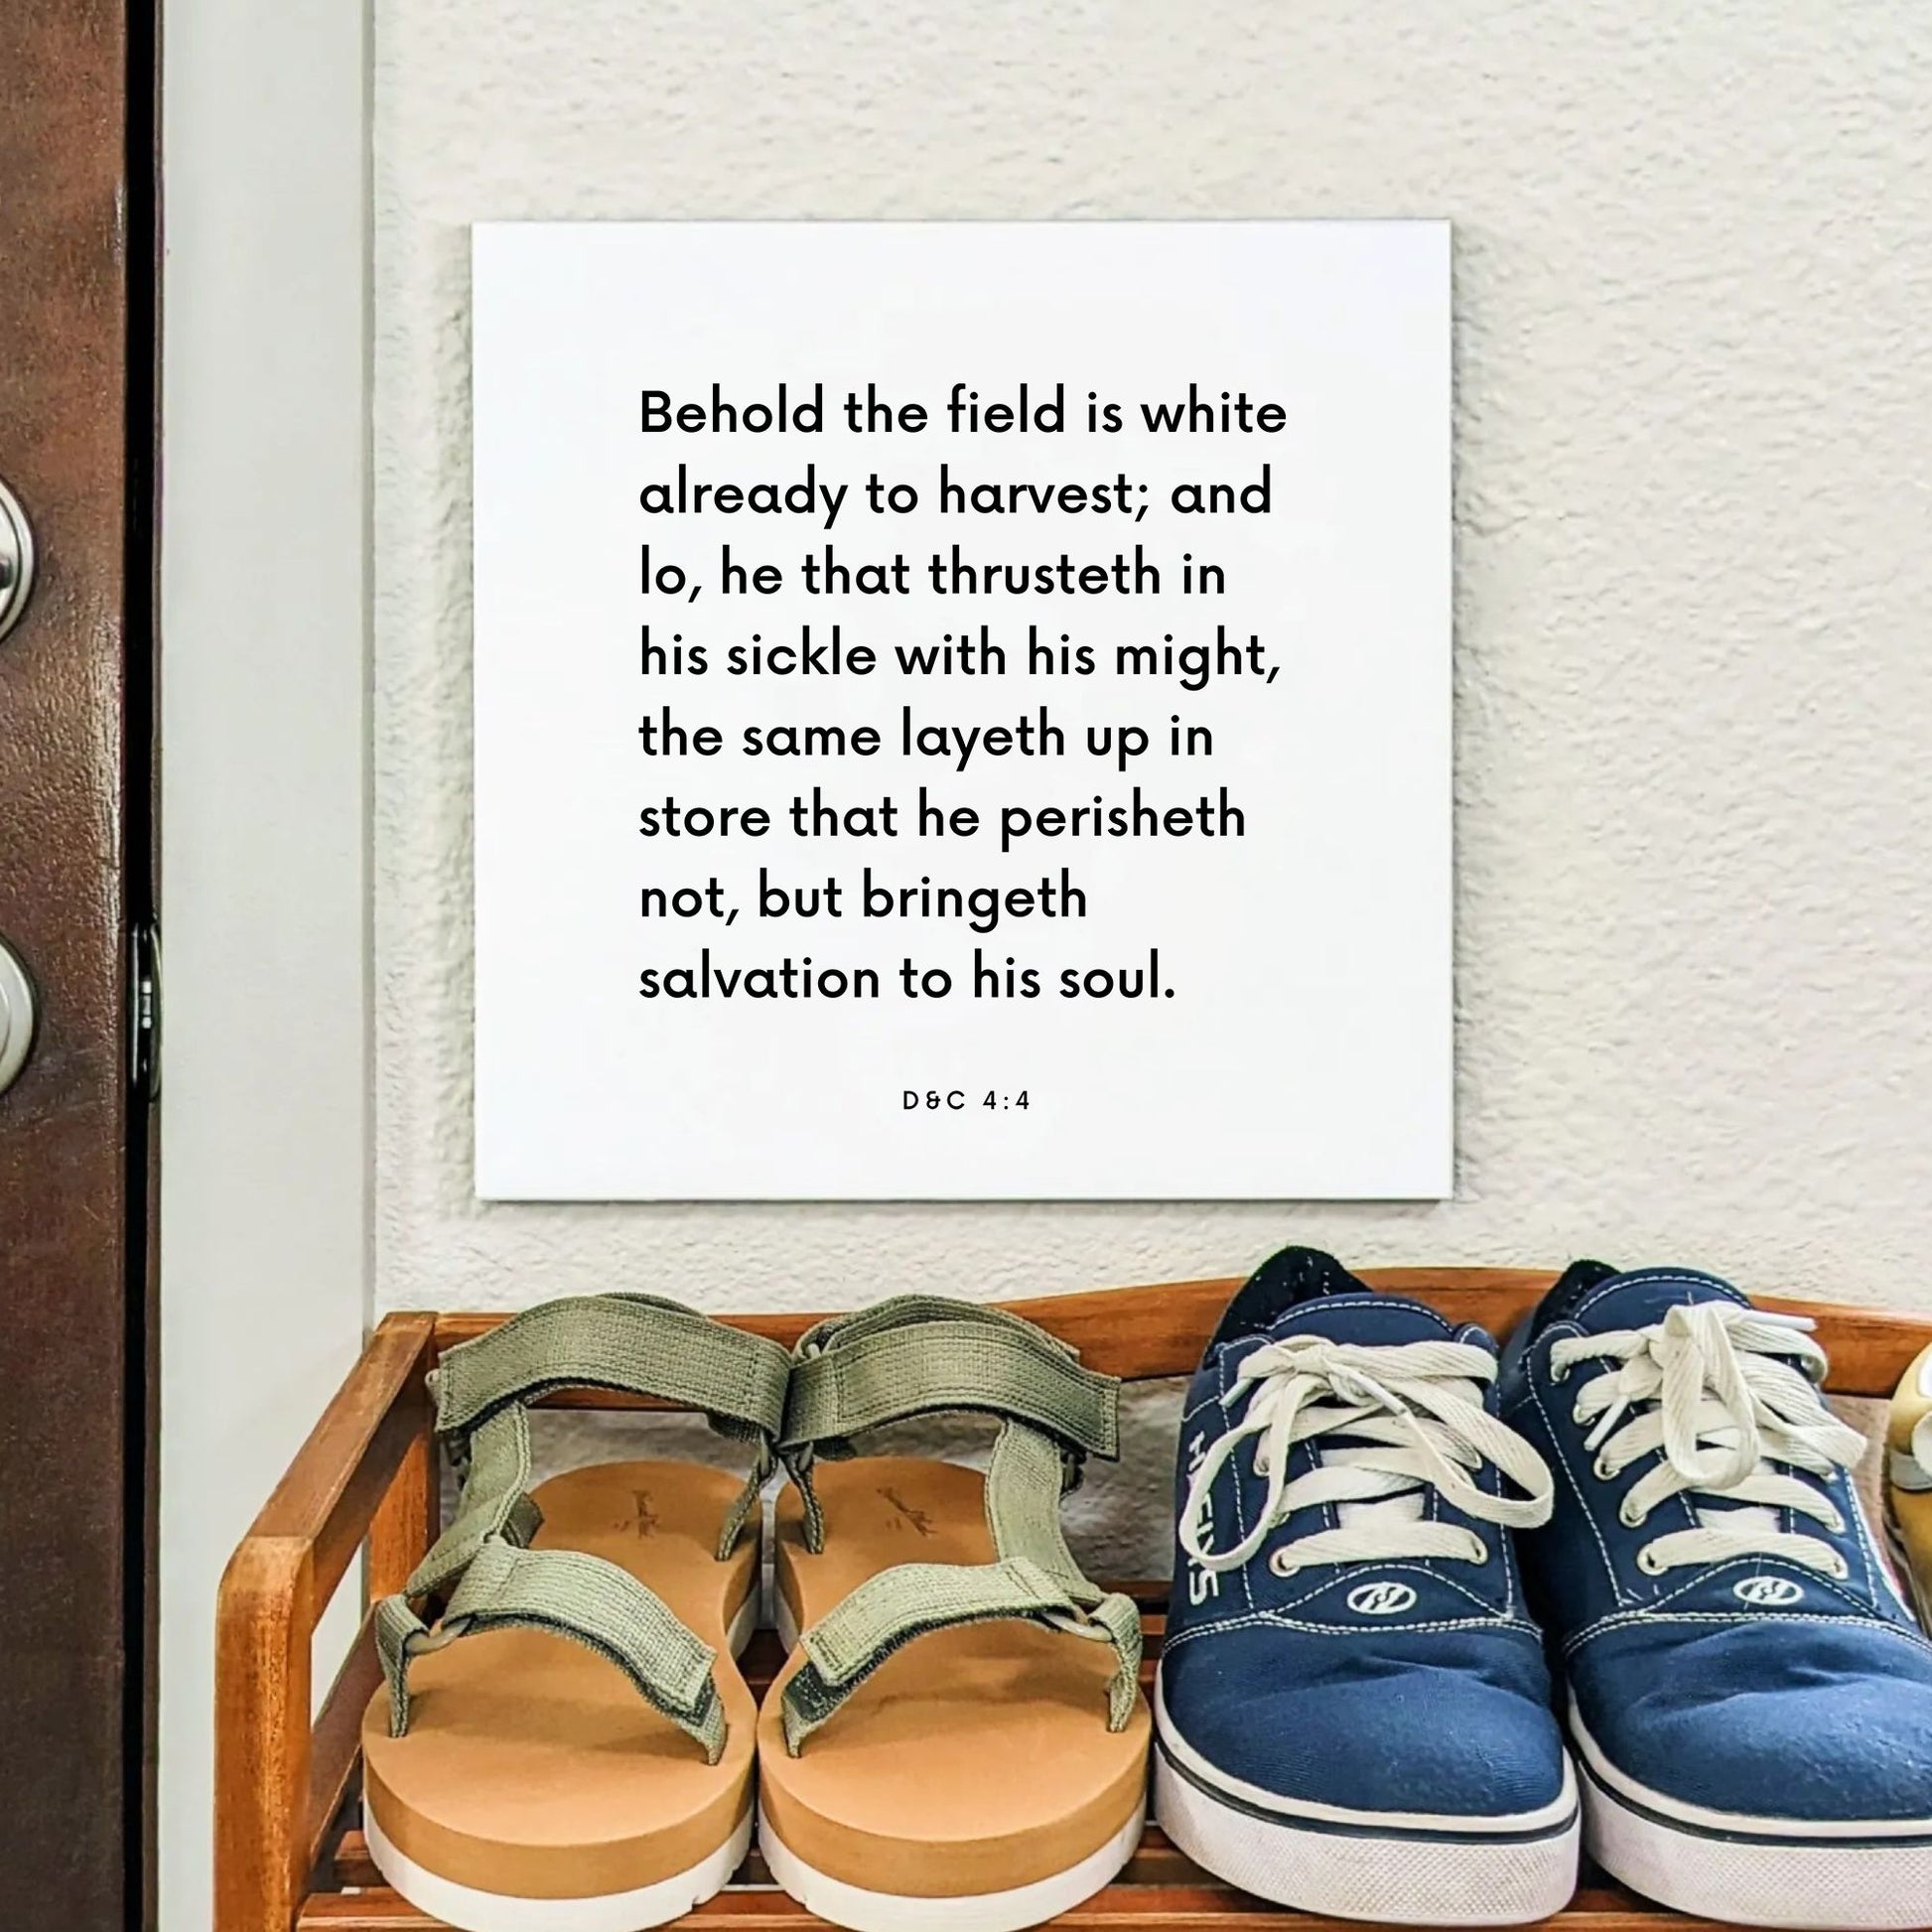 Shoes mouting of the scripture tile for D&C 4:4 - "Behold the field is white already to harvest"